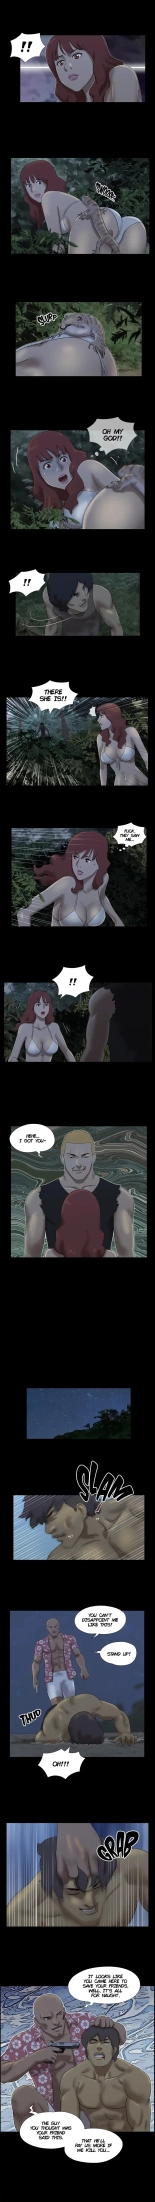 Naked Island : page 66